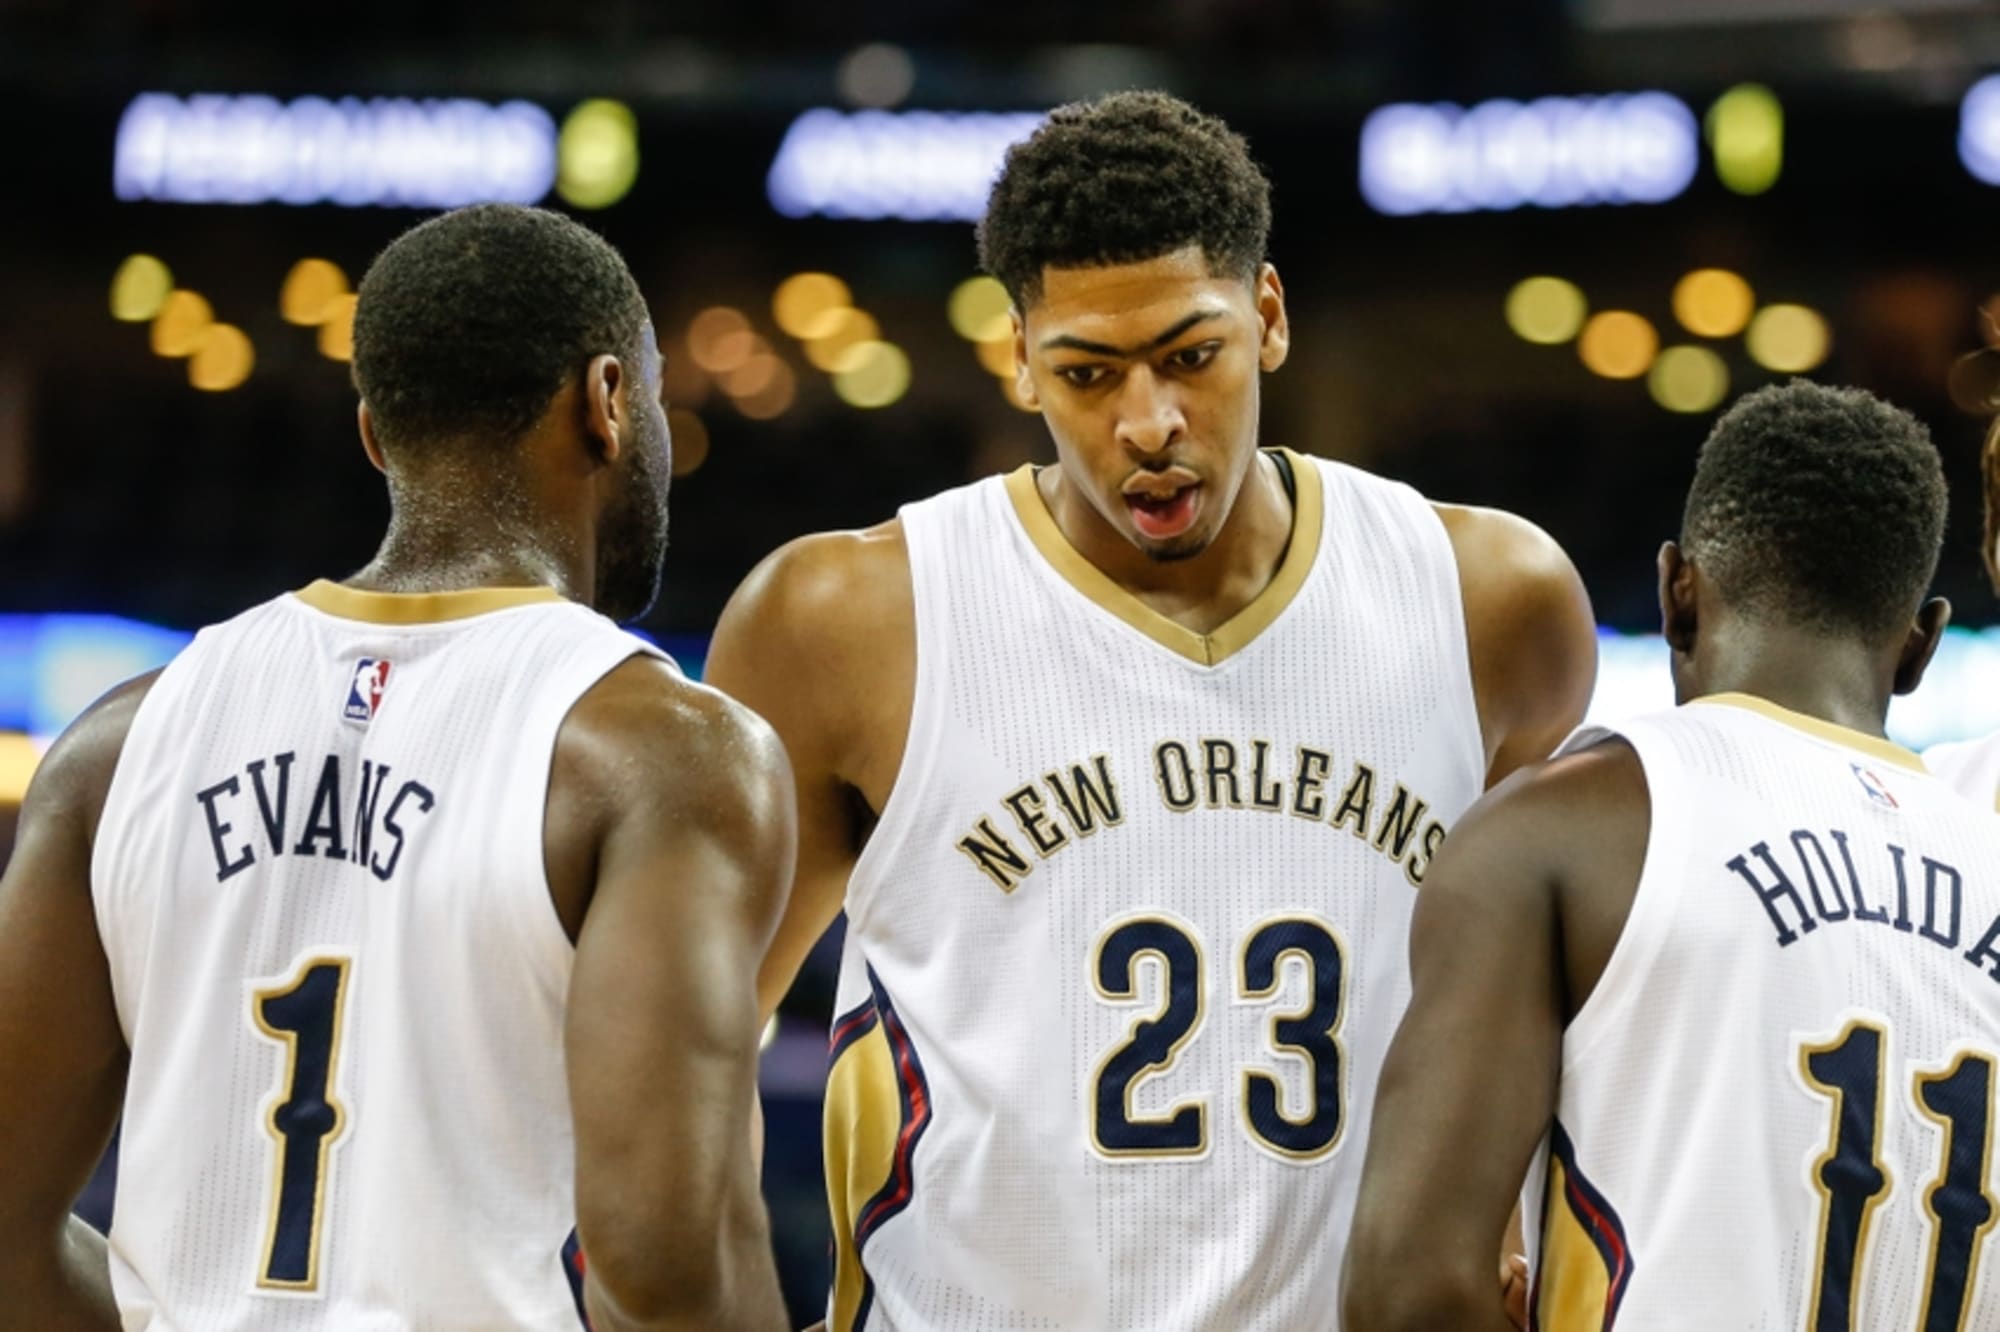 New Orleans Pelicans Can They Make the Playoffs?